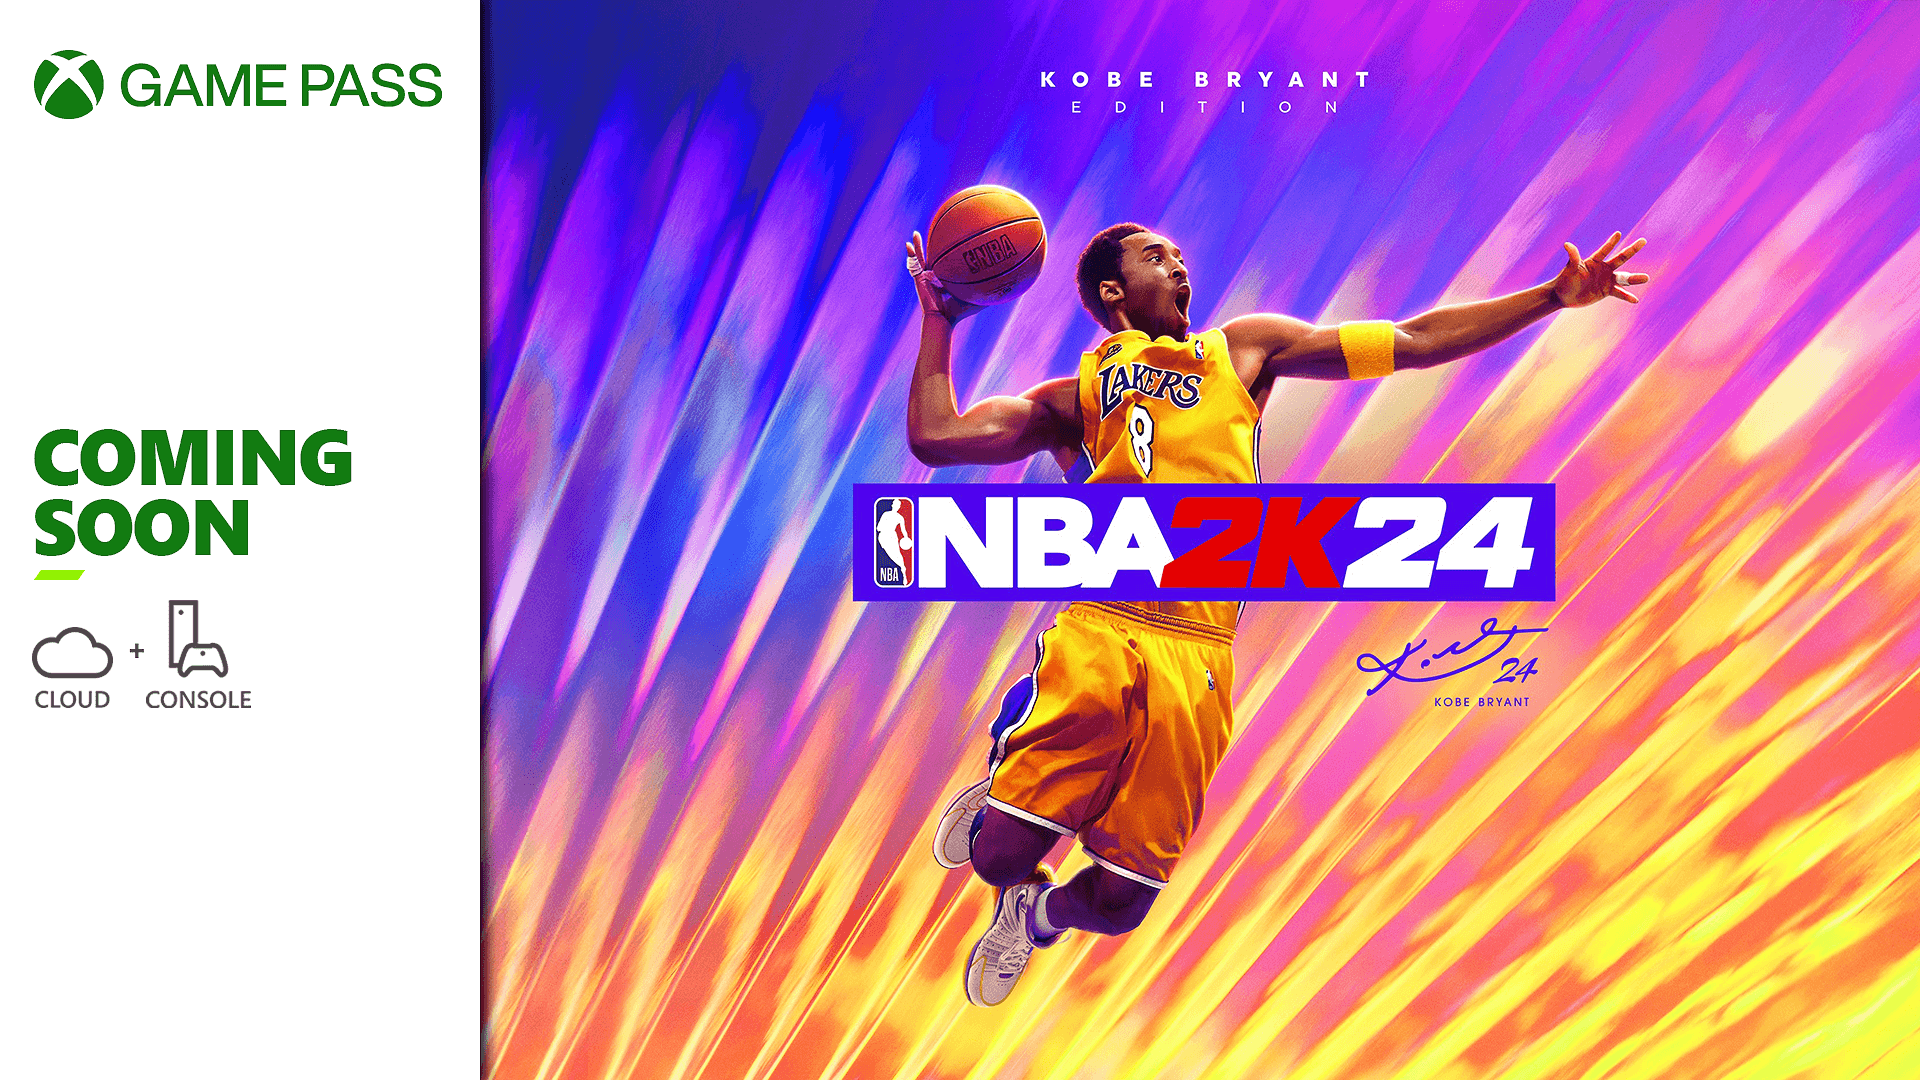 NBA 2K24 is coming soon to Xbox Game Pass. 